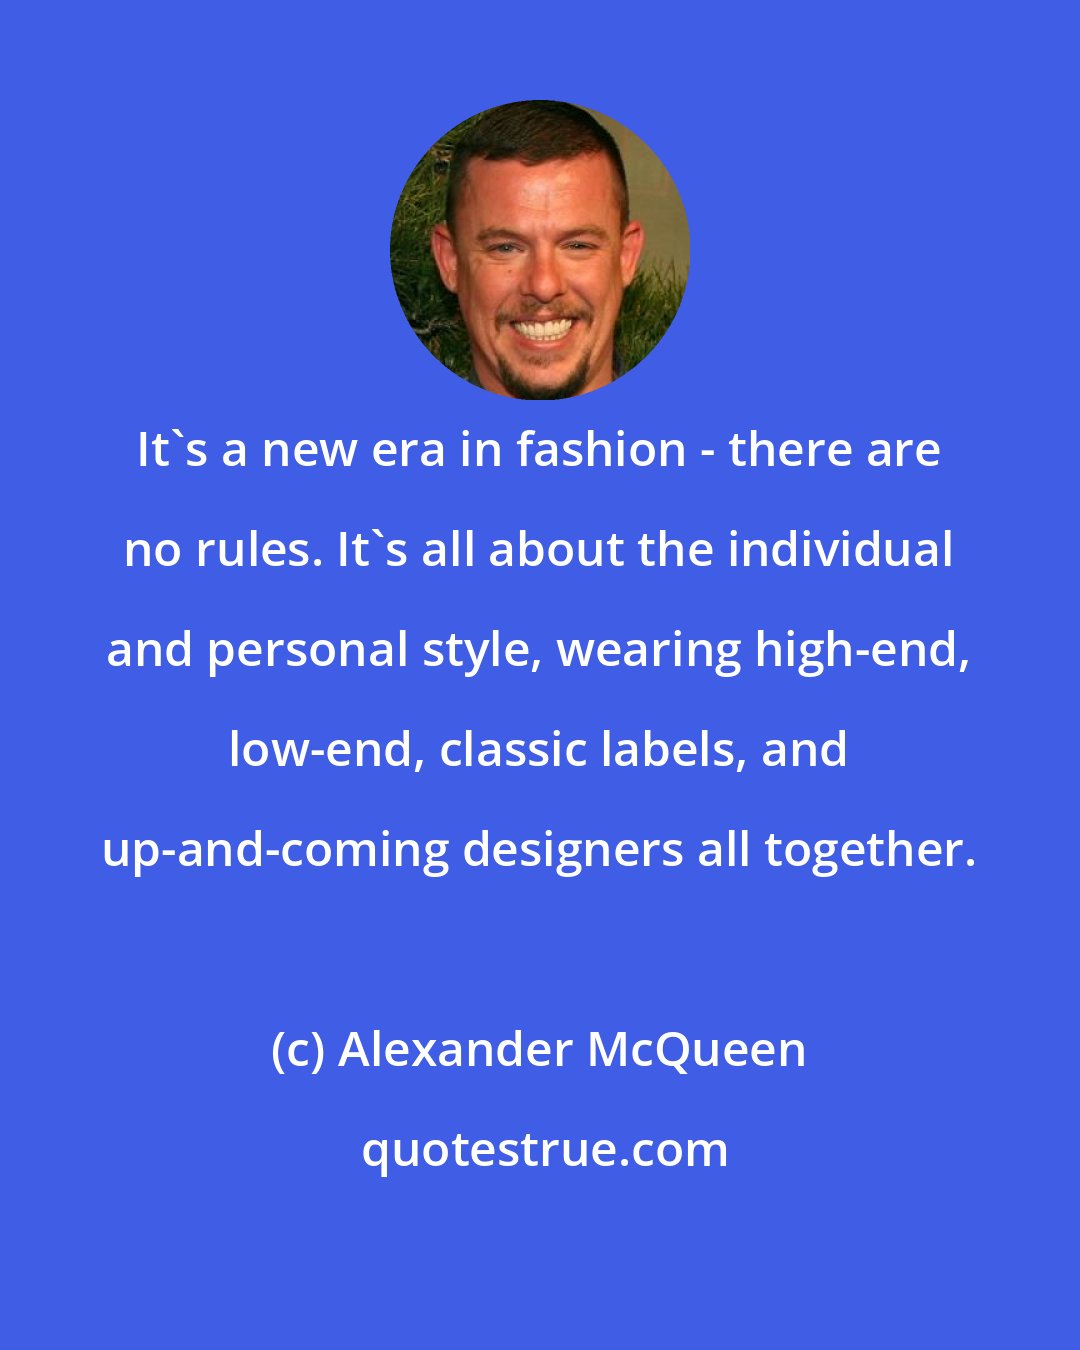 Alexander McQueen: It's a new era in fashion - there are no rules. It's all about the individual and personal style, wearing high-end, low-end, classic labels, and up-and-coming designers all together.